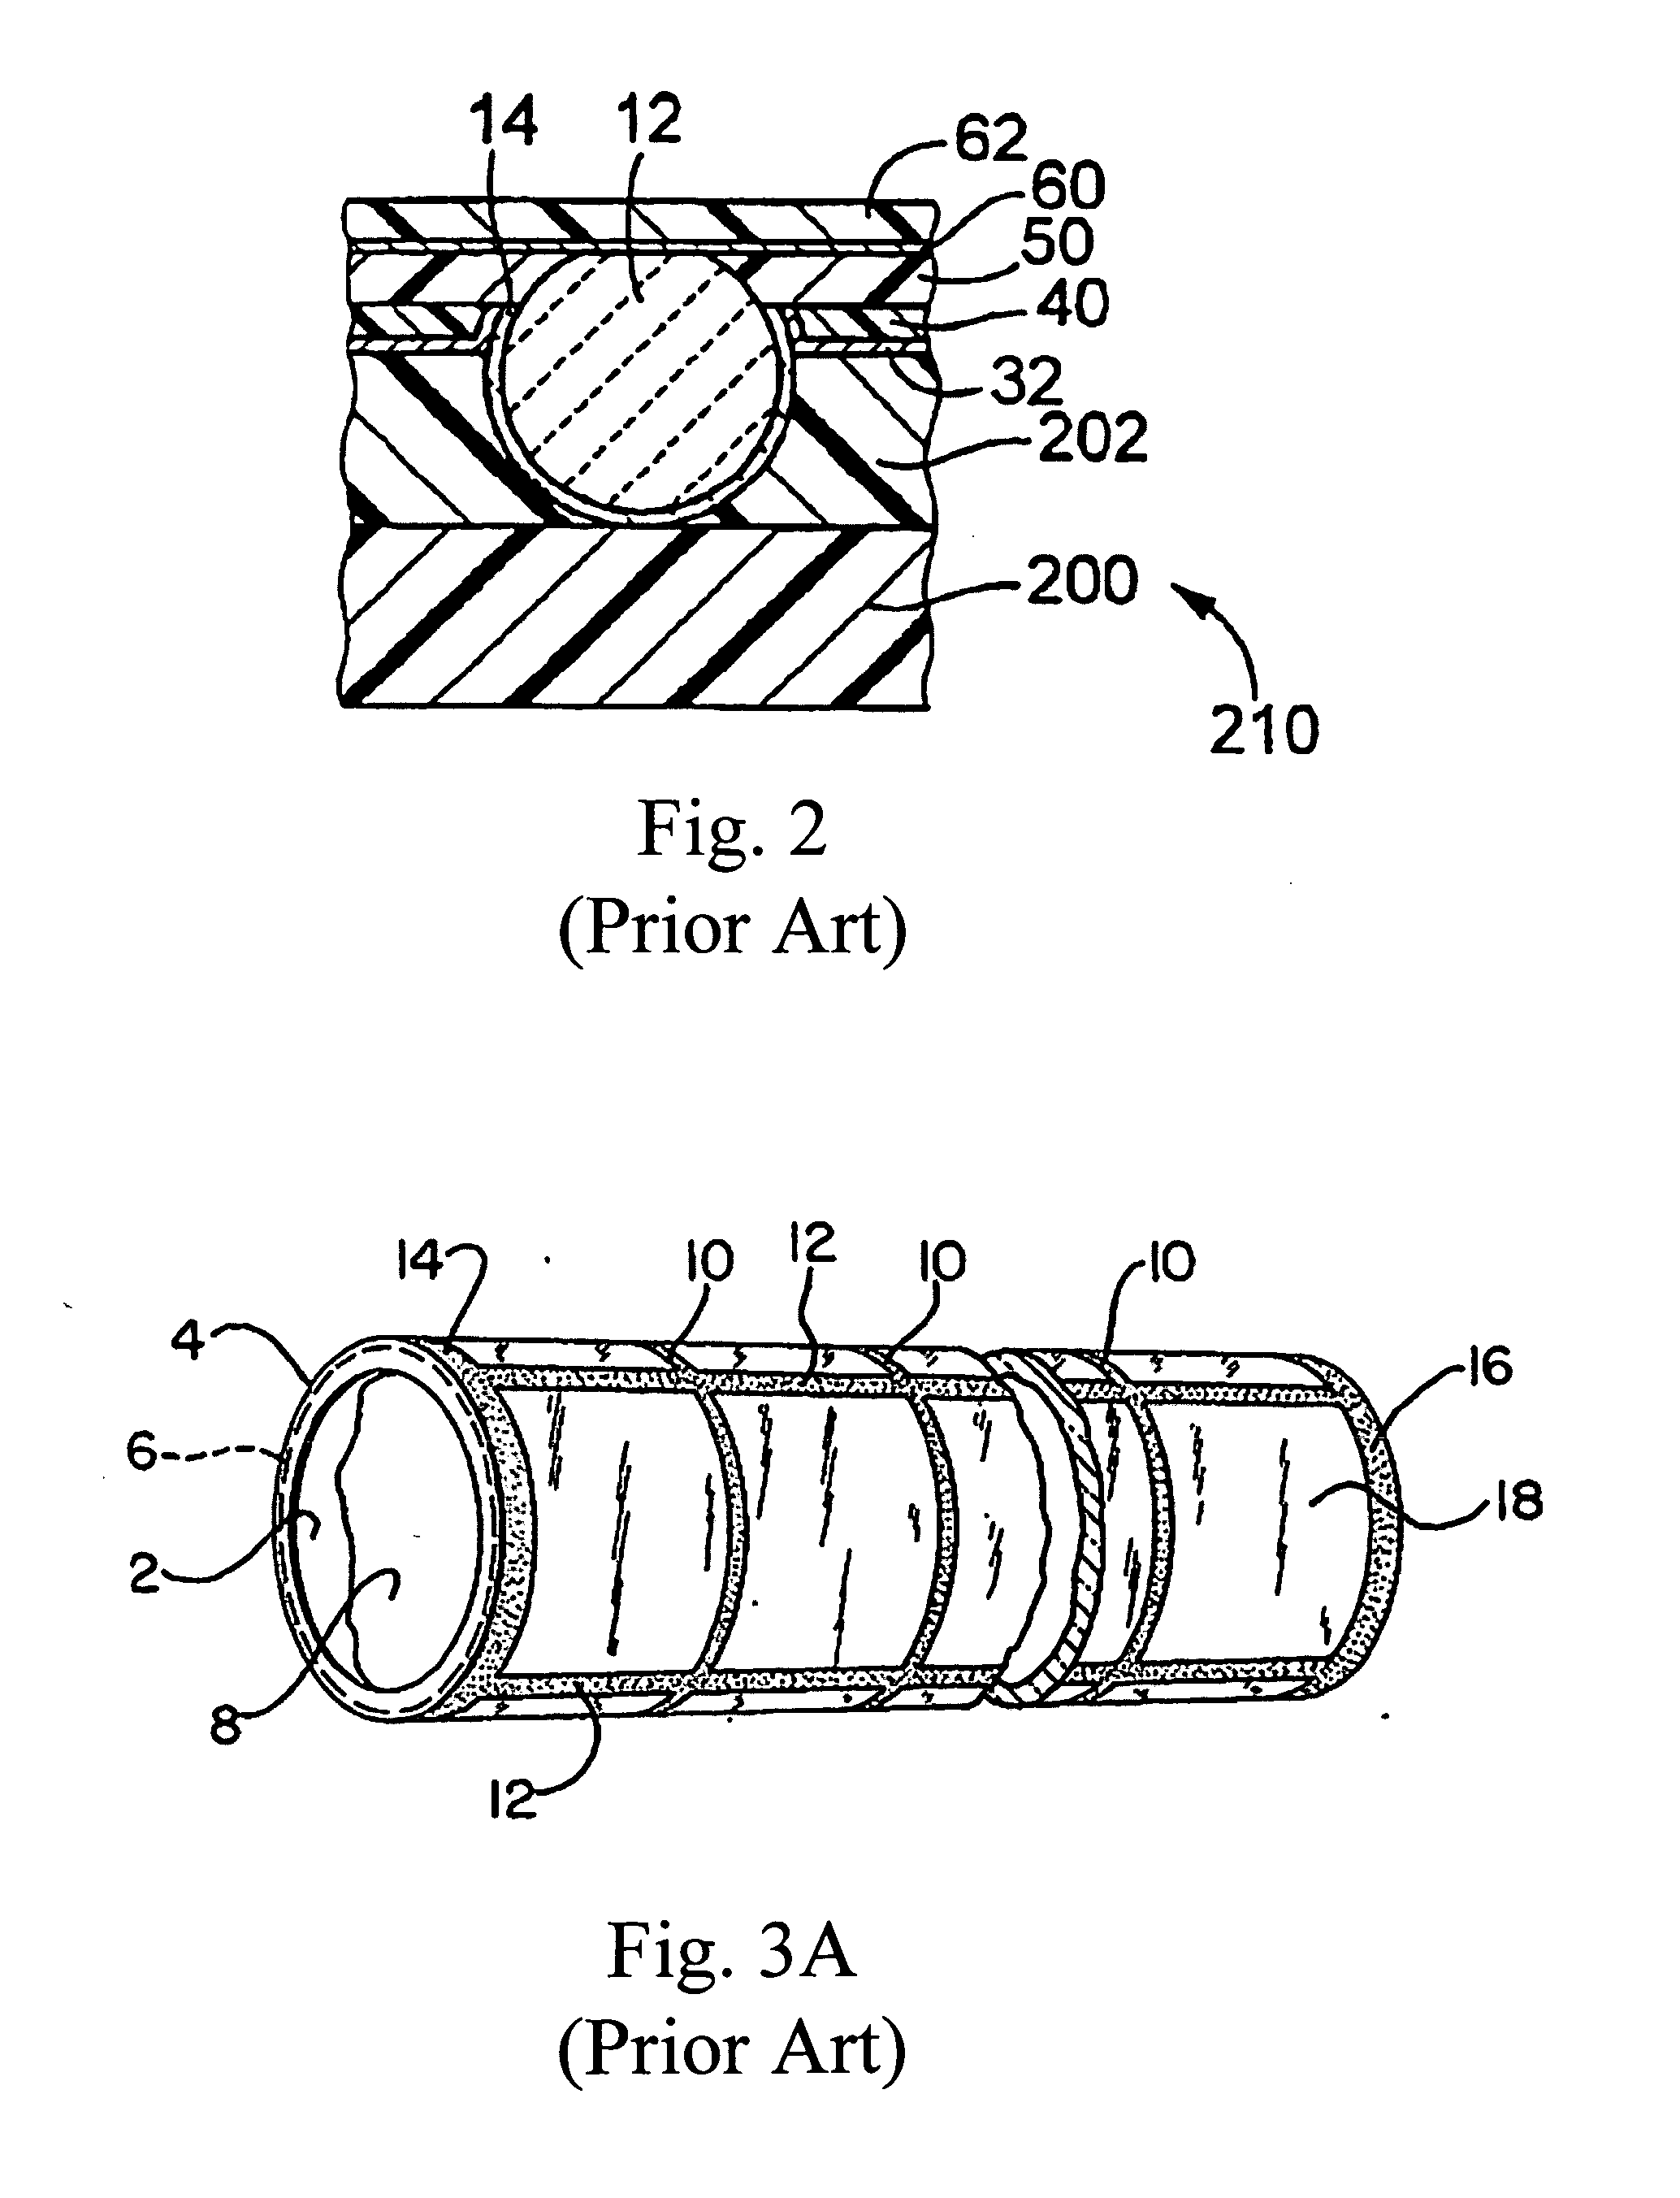 Bifacial elongated solar cell devices with internal reflectors